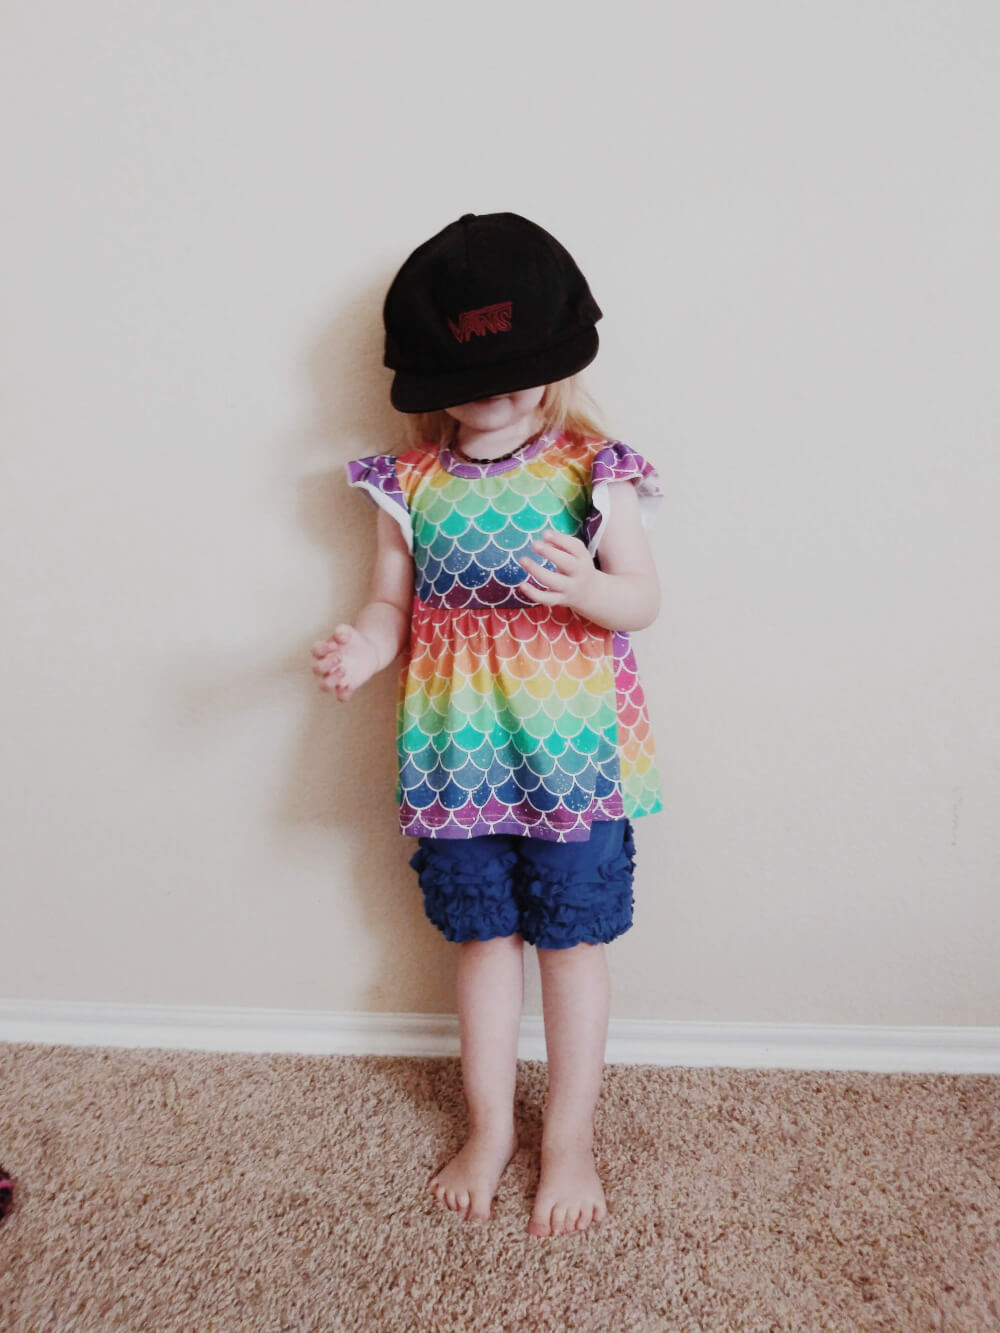 Toddler in rainbow scales outfit wearing a cap too big